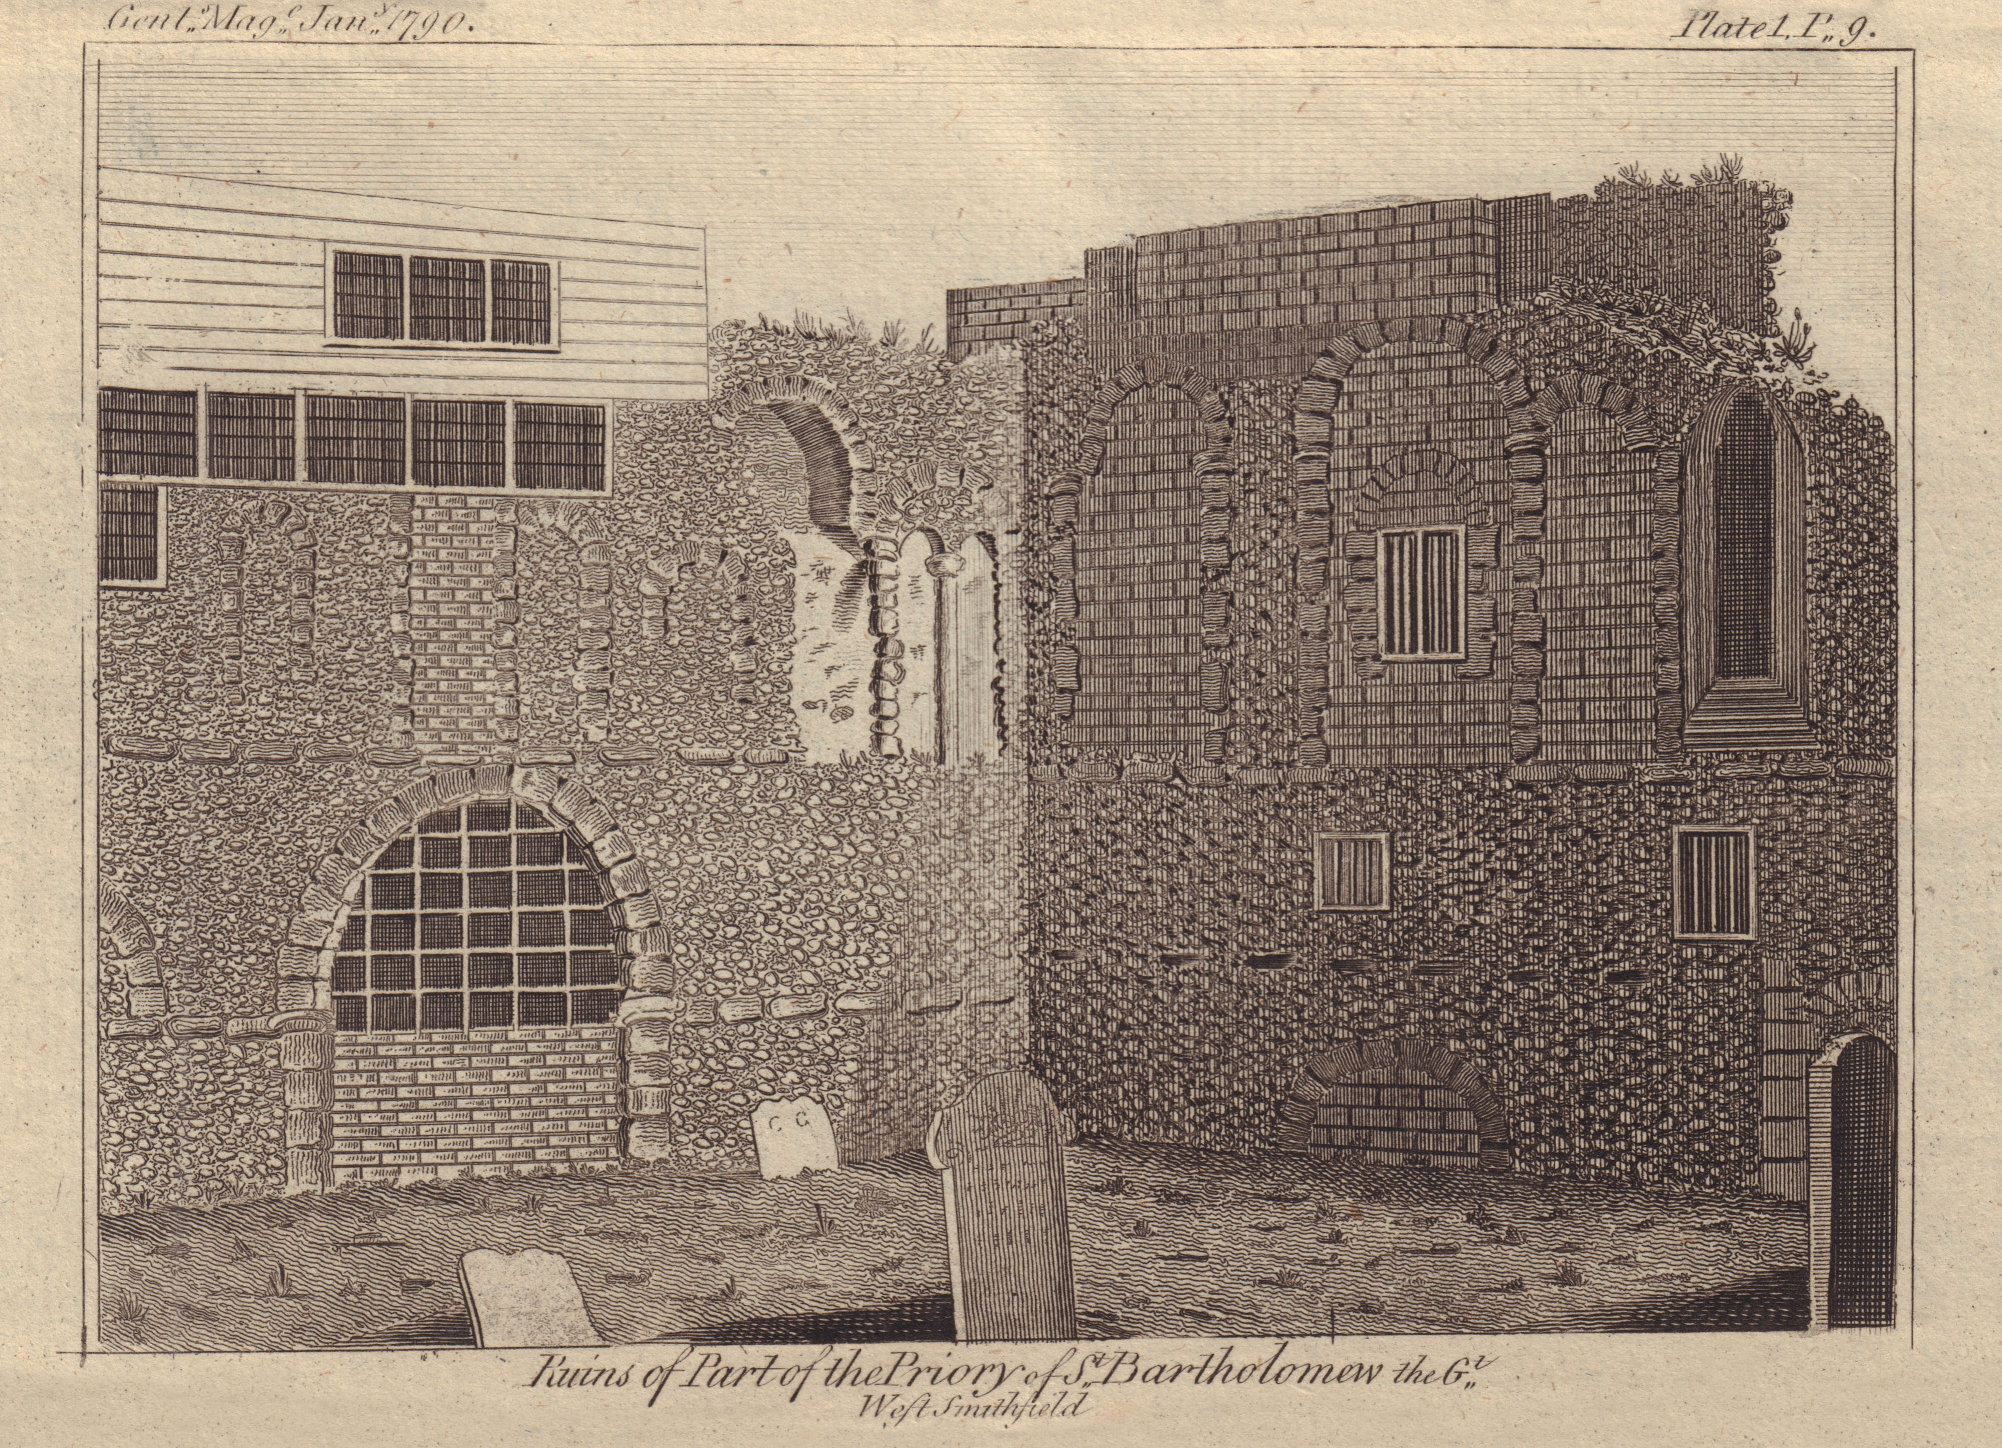 Associate Product Ruins of the Priory of St. Bartholomew the Great, Smithfield, London 1790